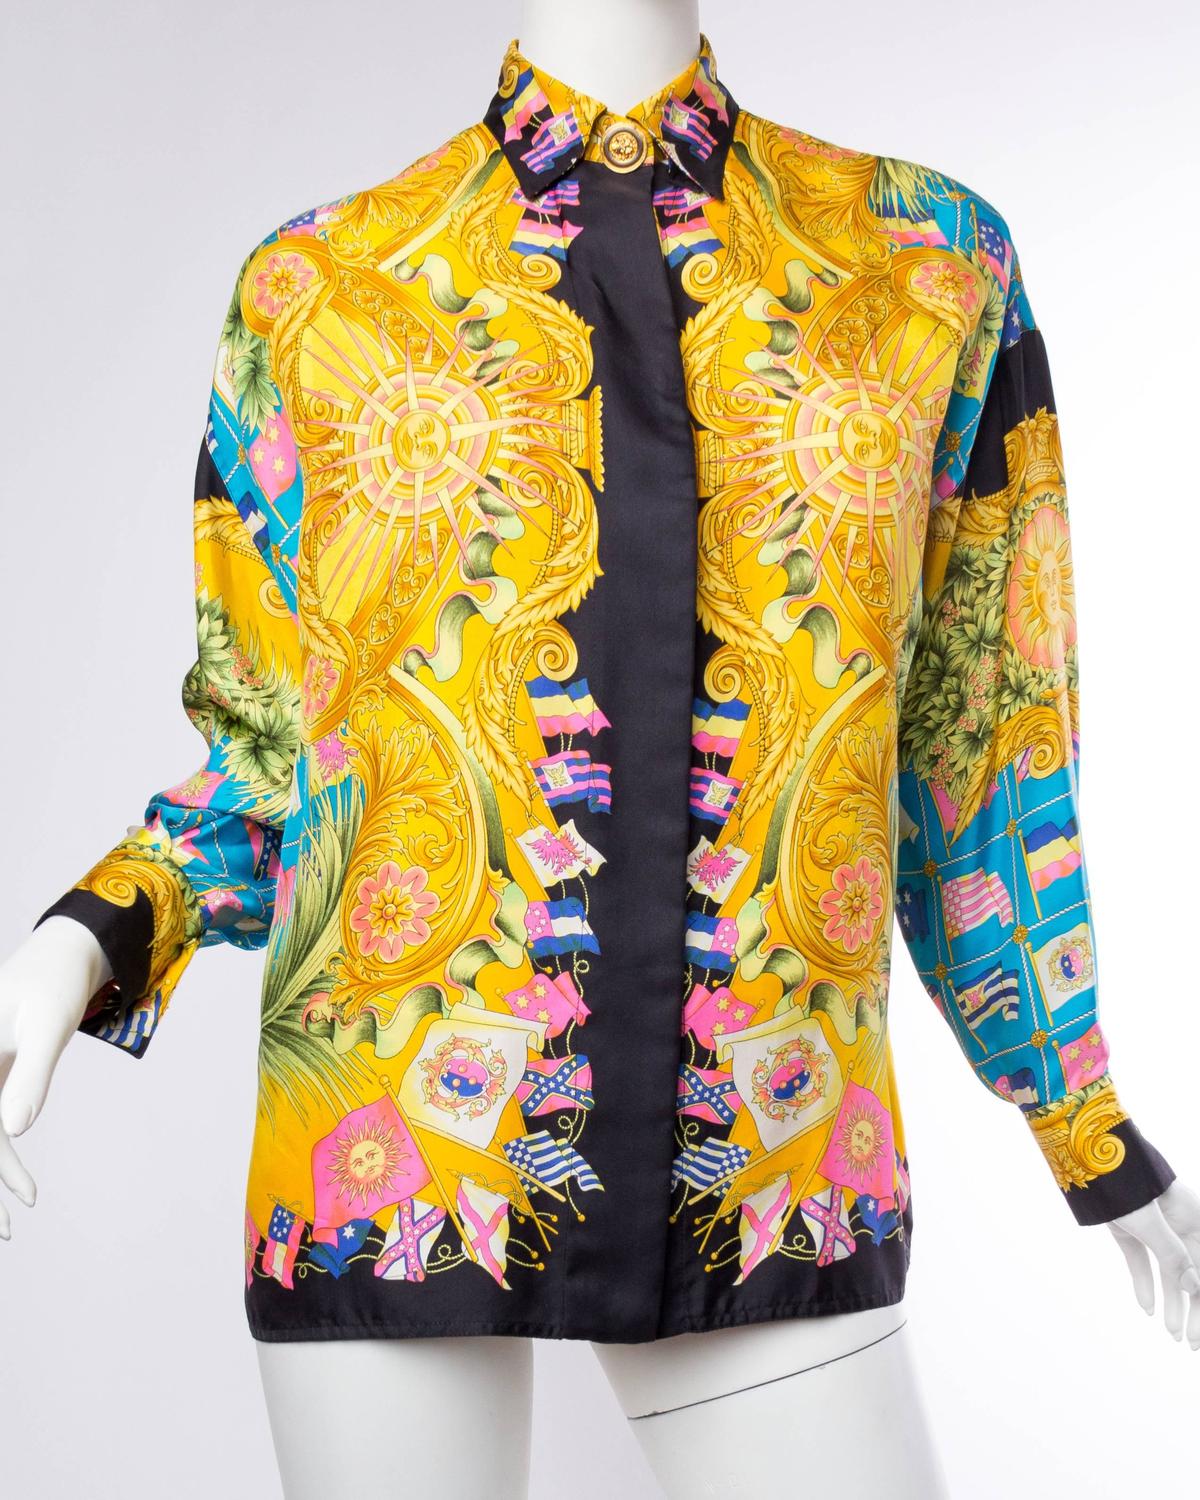 Gianni Versace Couture Women's Printed Silk Blouse For Sale at 1stdibs